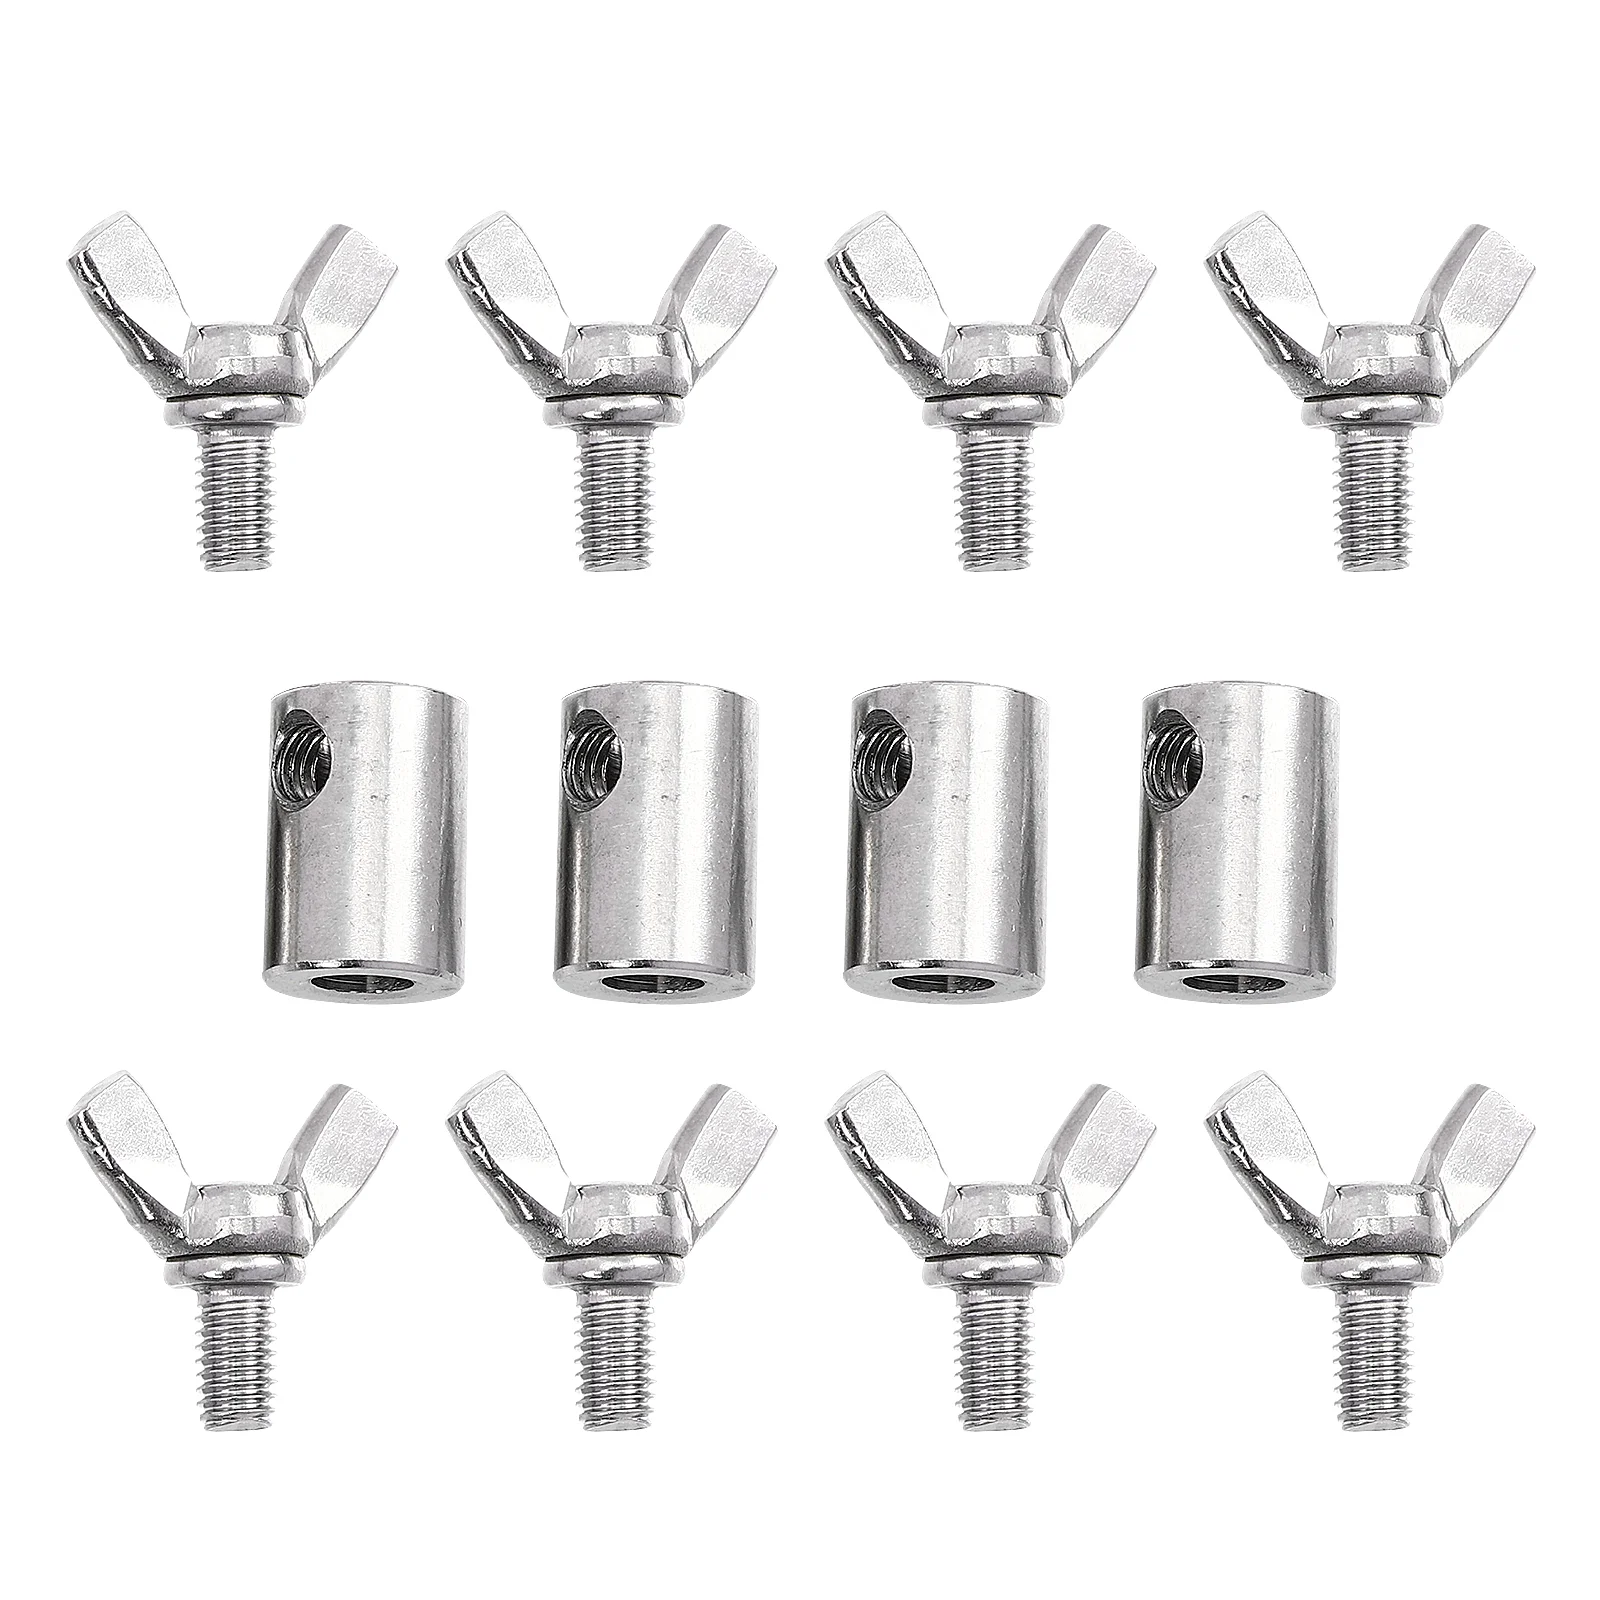 

4 Pcs Bolt Saddle Fastener Cable Clamp Clip Wire Clamps Fasteners Stainless Steel Bolts Rope Screw